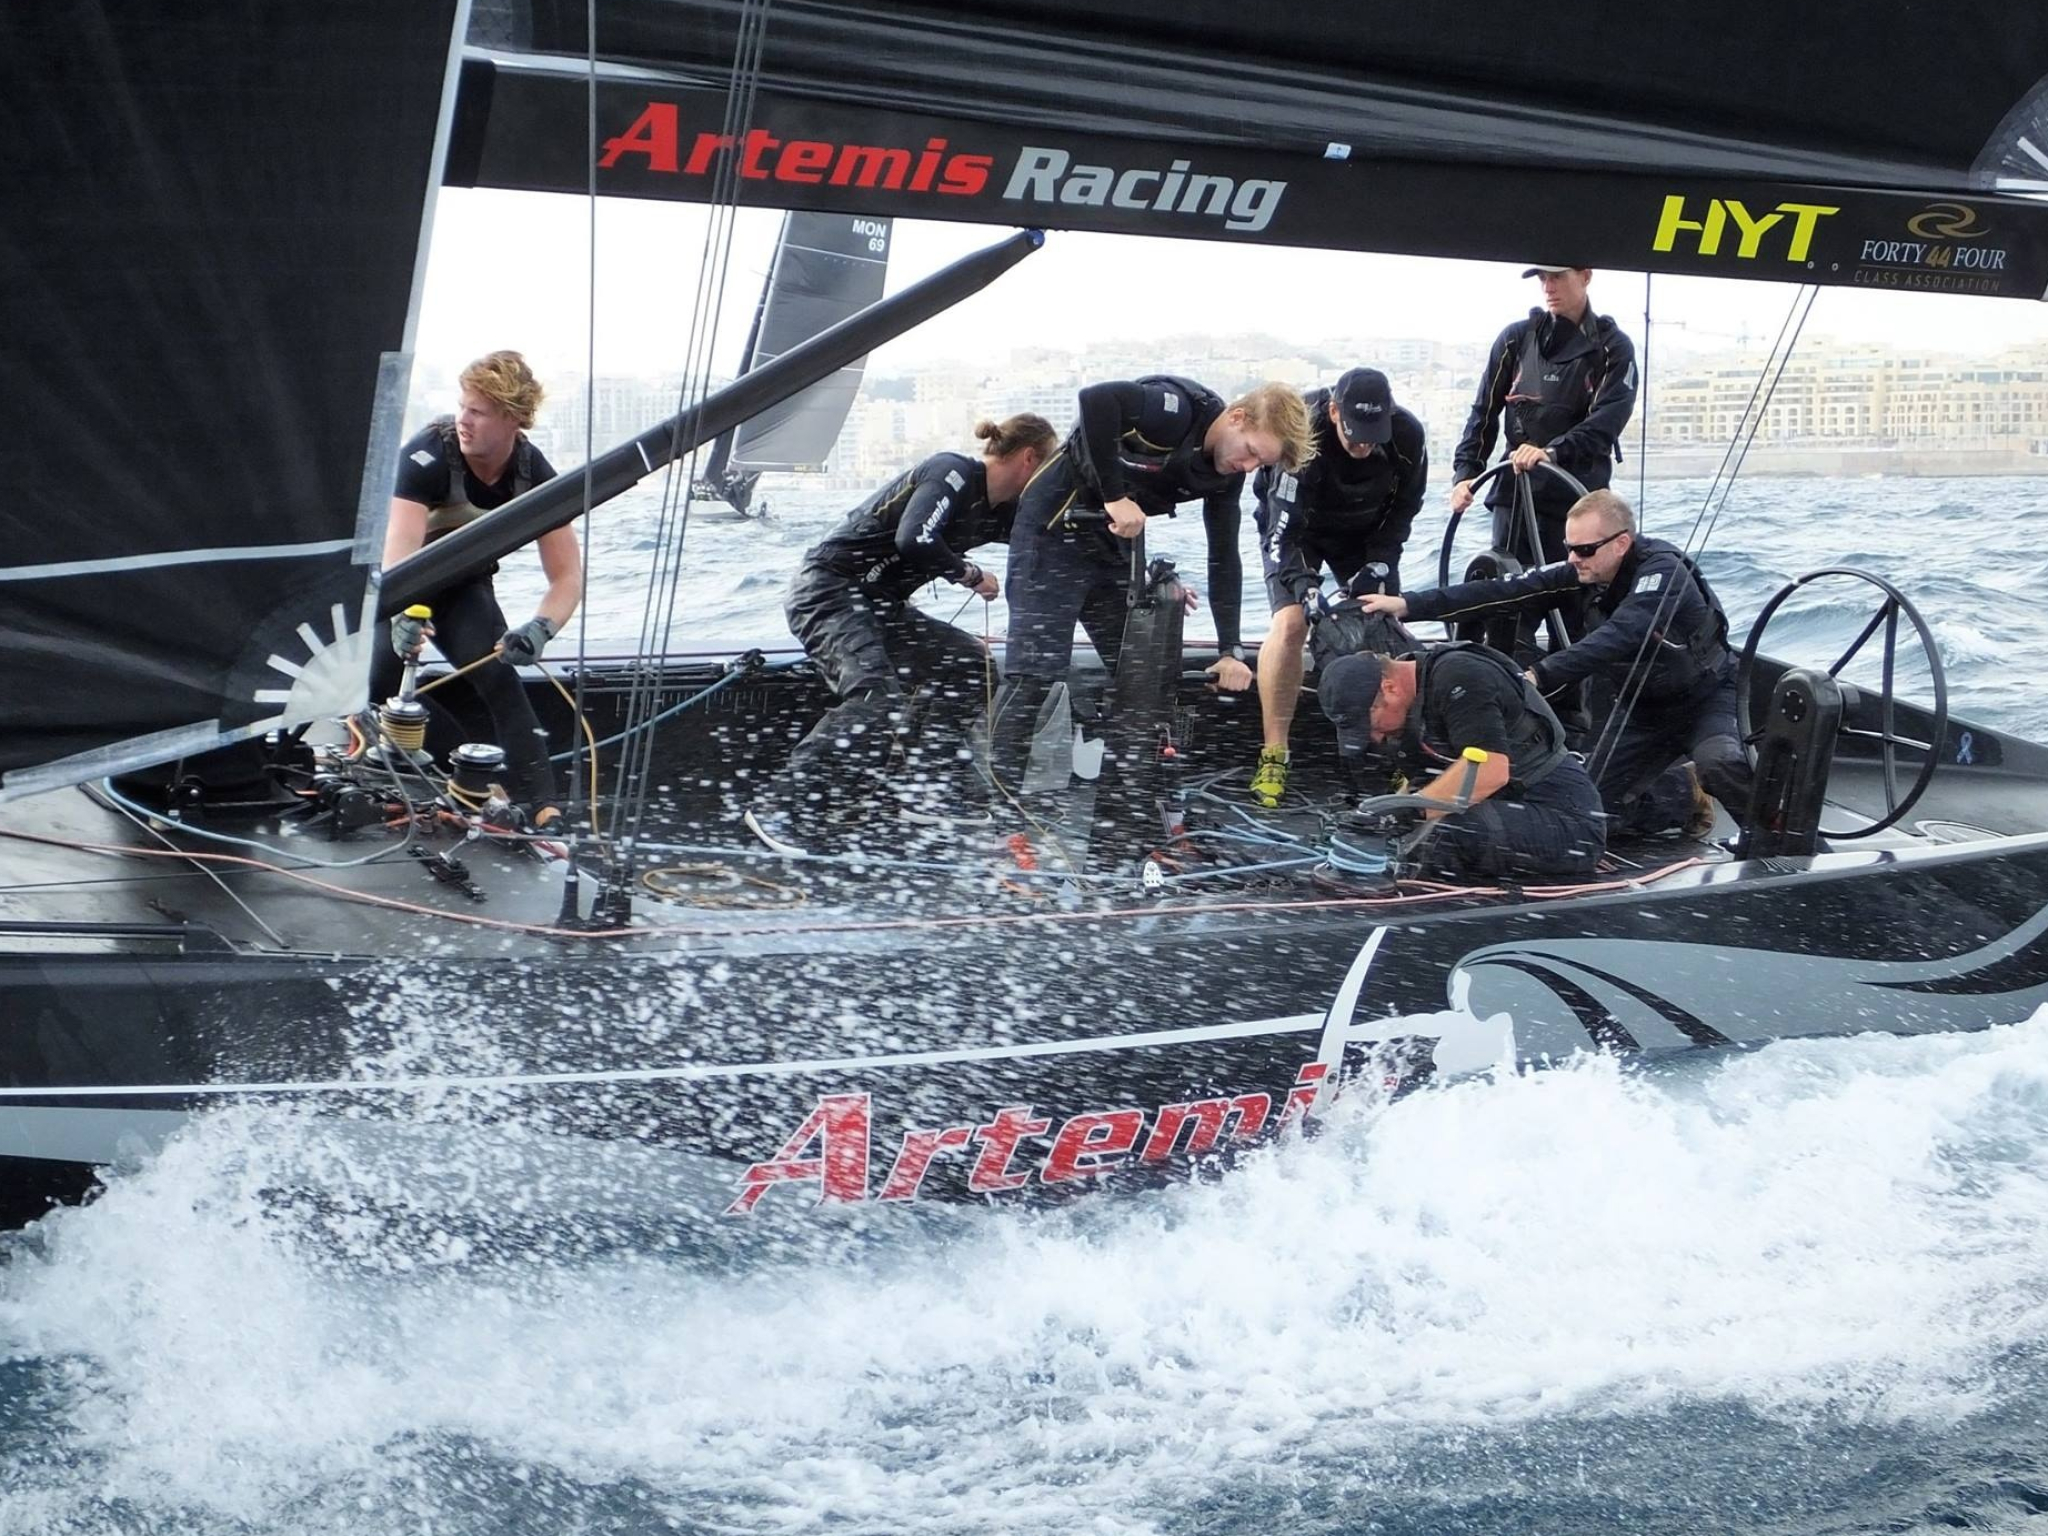 Yacht Racing: Artemis Racing, A sailing sport involving large sailboats, Water competition event. 2050x1540 HD Wallpaper.